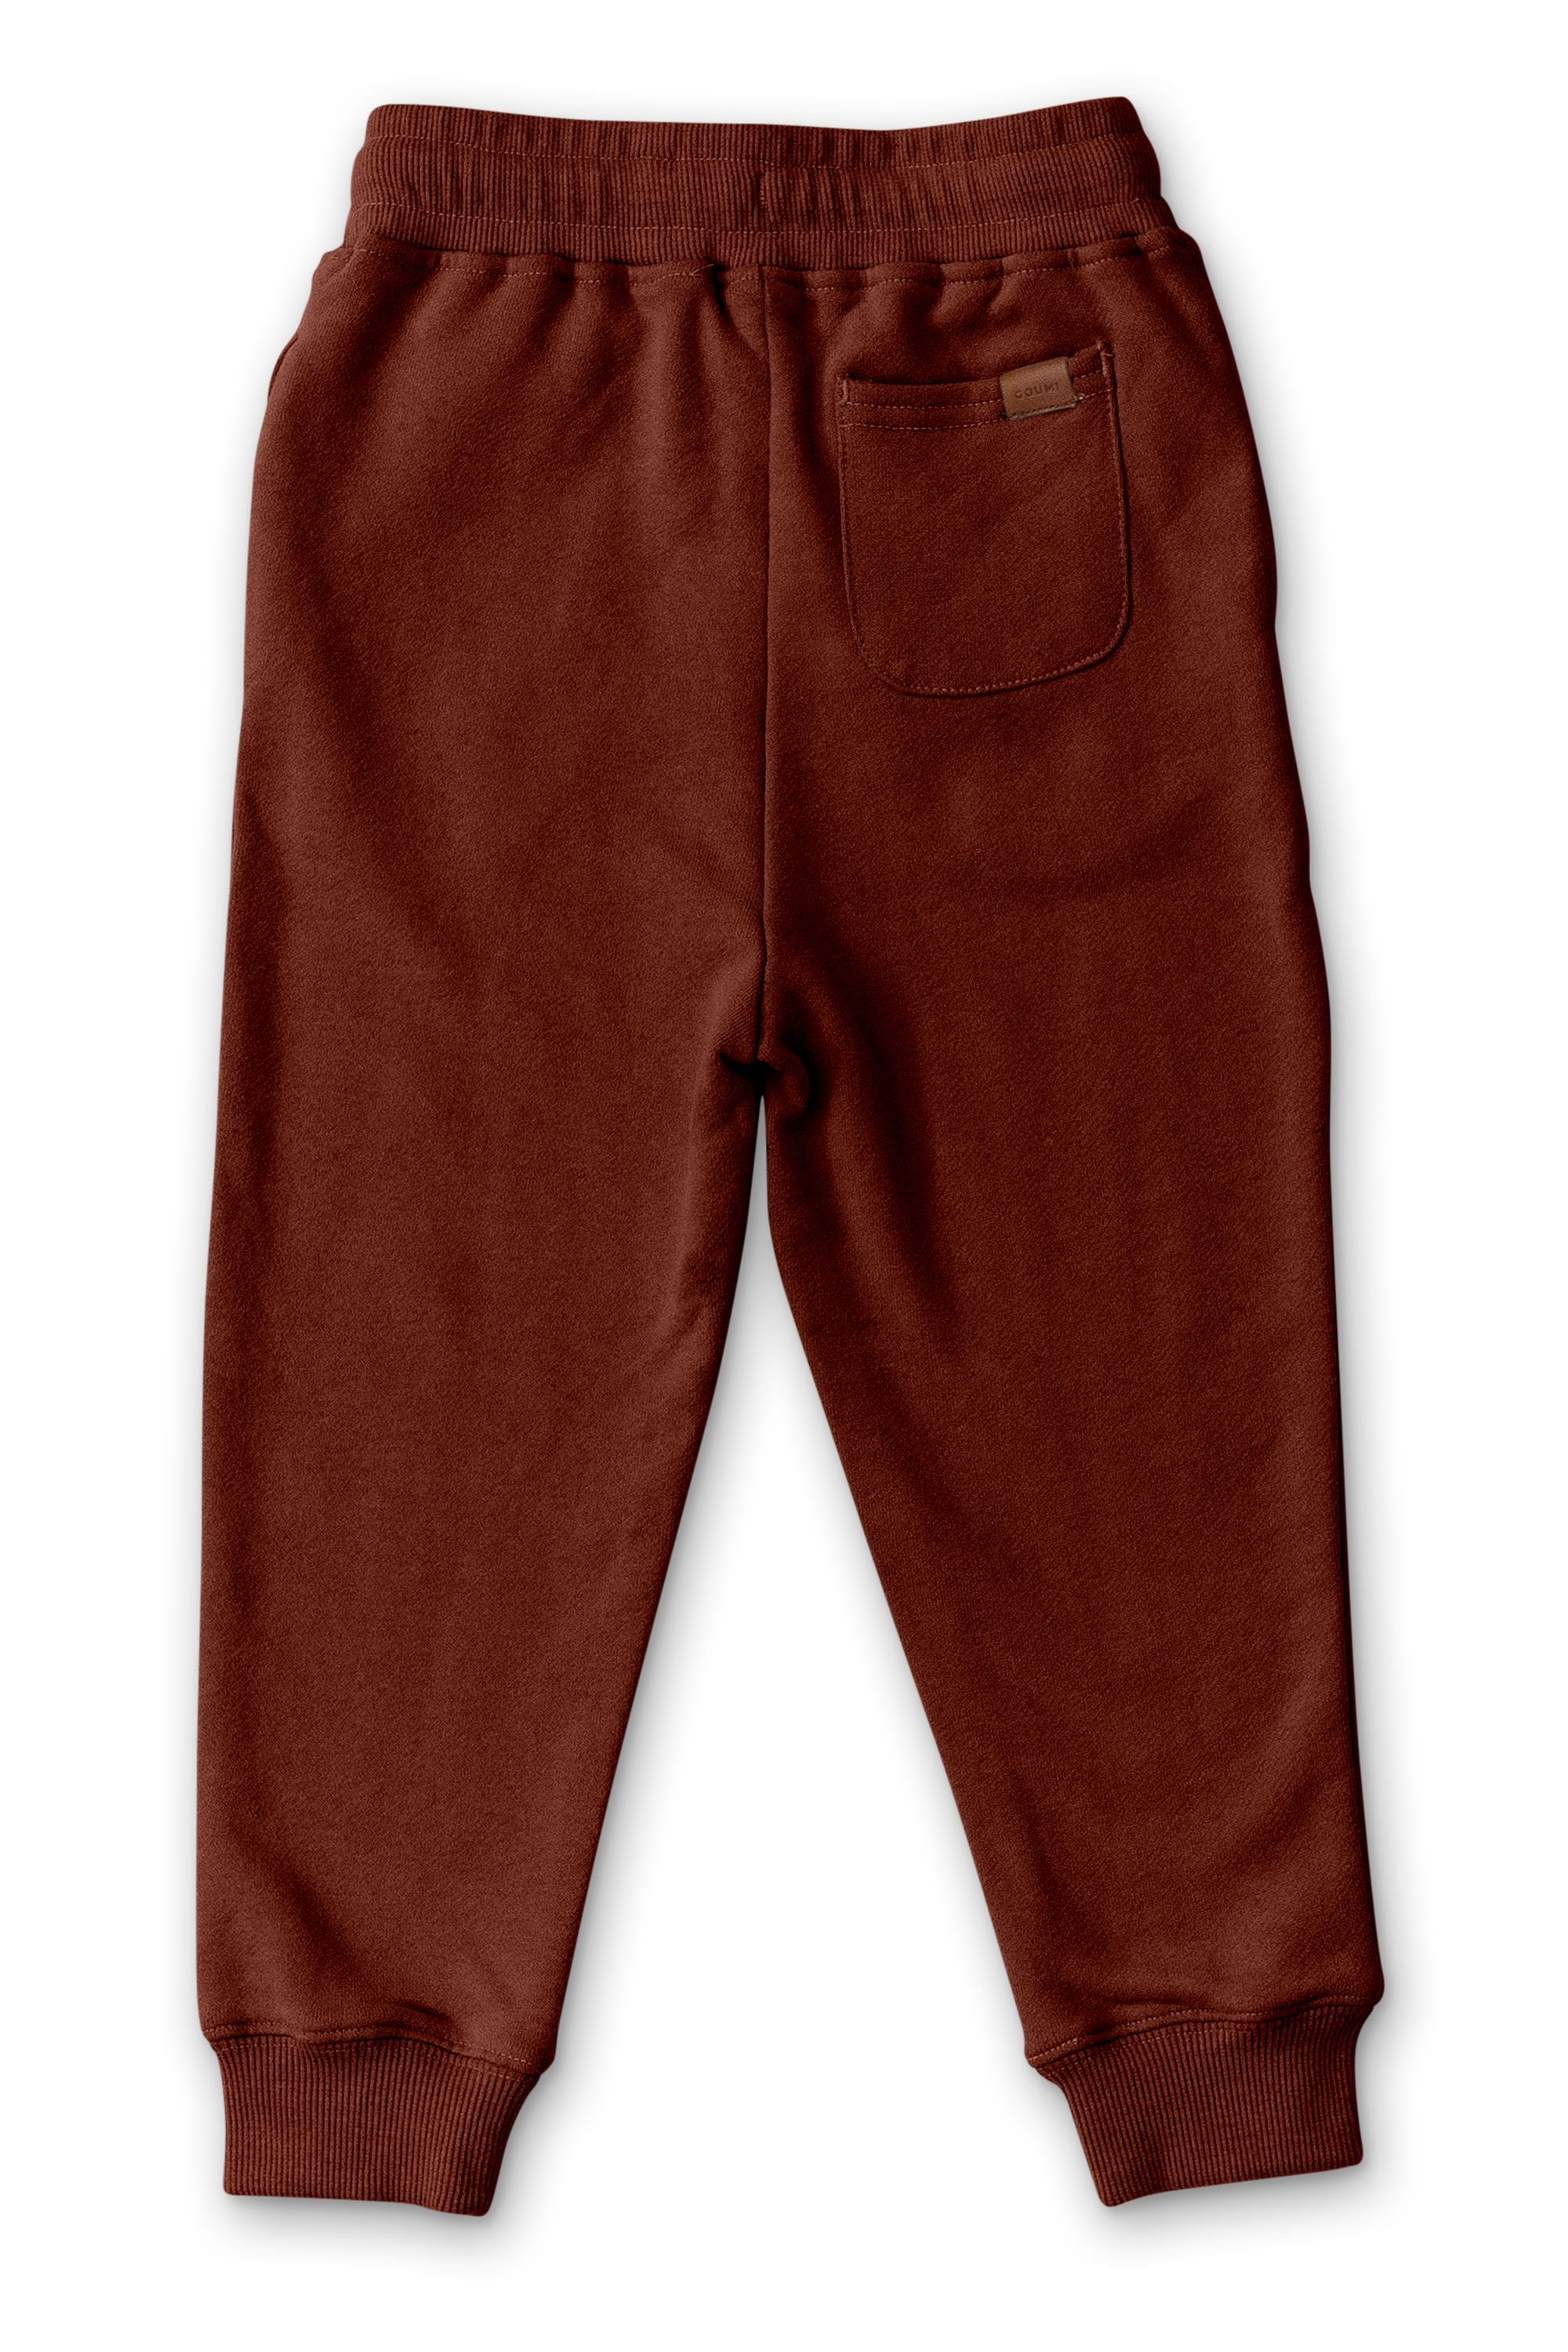 FRENCH TERRY SWEATSUIT SET | REDWOOD